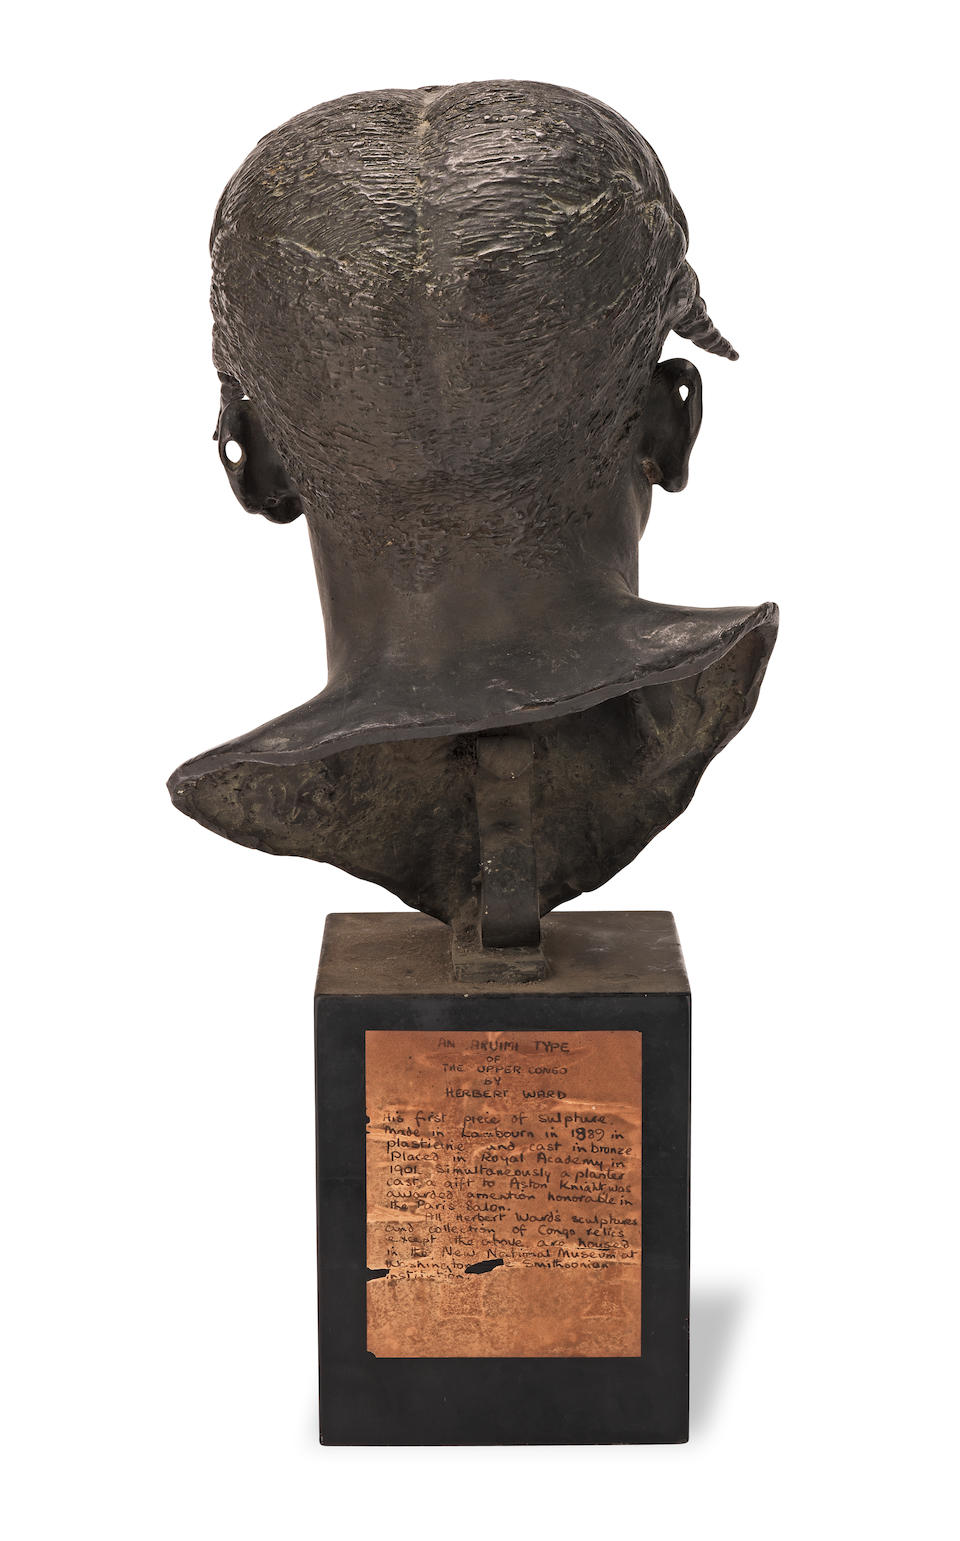 Herbert Ward (British, 1863-1919): A patinated bronze bust of a native African head entitled  'An Aruimi Type' with direct provenance to Herbert and Sarita Ward